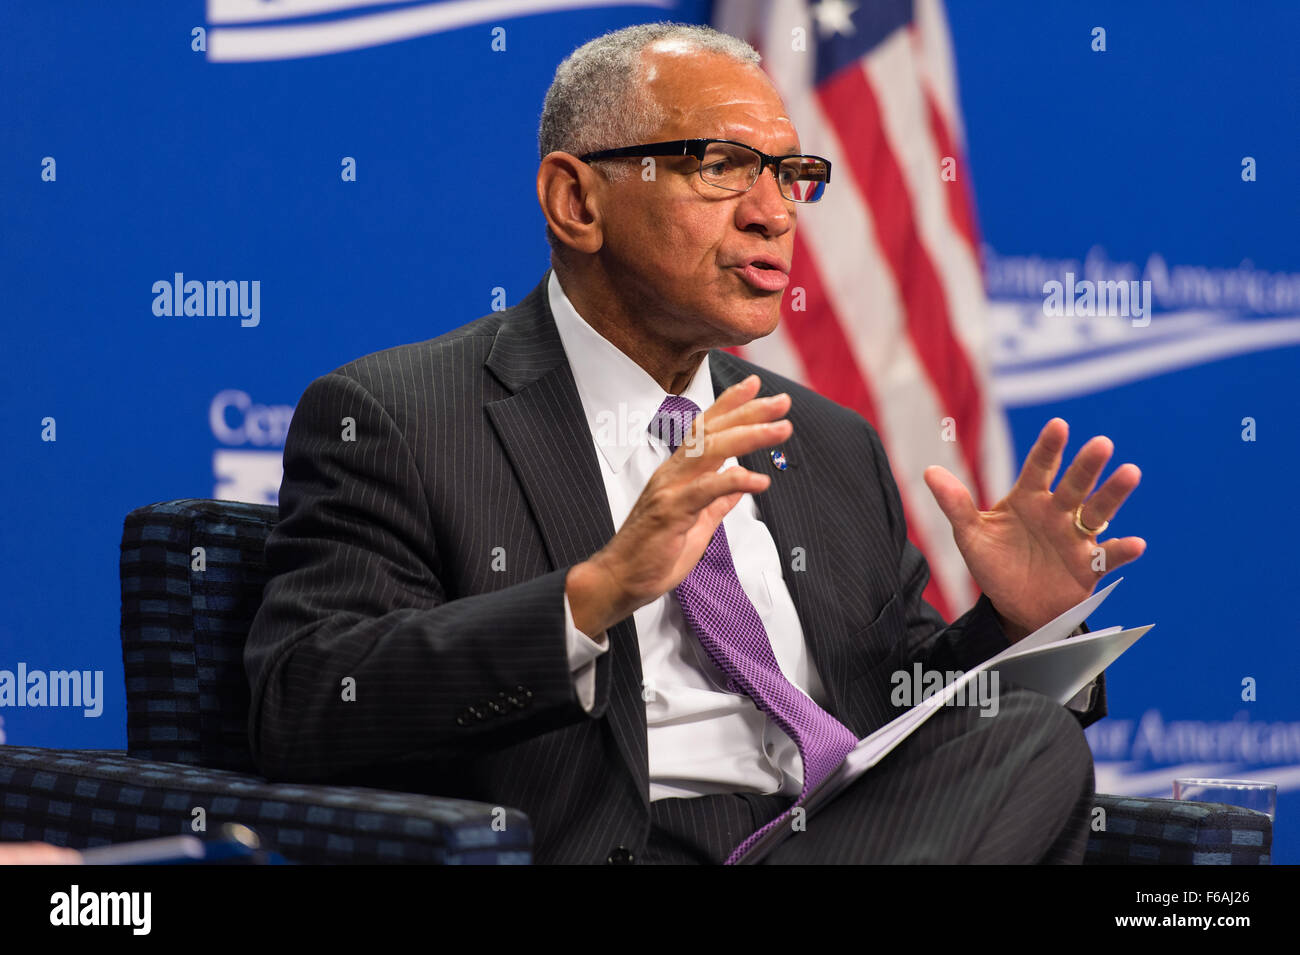 NASA Administrator Charles Bolden answers a question from the audience after providing a keynote address at the Human Space Exploration: The Next Steps event on Wednesday, Oct. 28, 2015 at The Center for American Progress in Washington DC. Administrator Bolden spoke about the future of human exploration in the context of NASA’s Journey to Mars. Photo Credit: (NASA/Aubrey Gemignani) Stock Photo